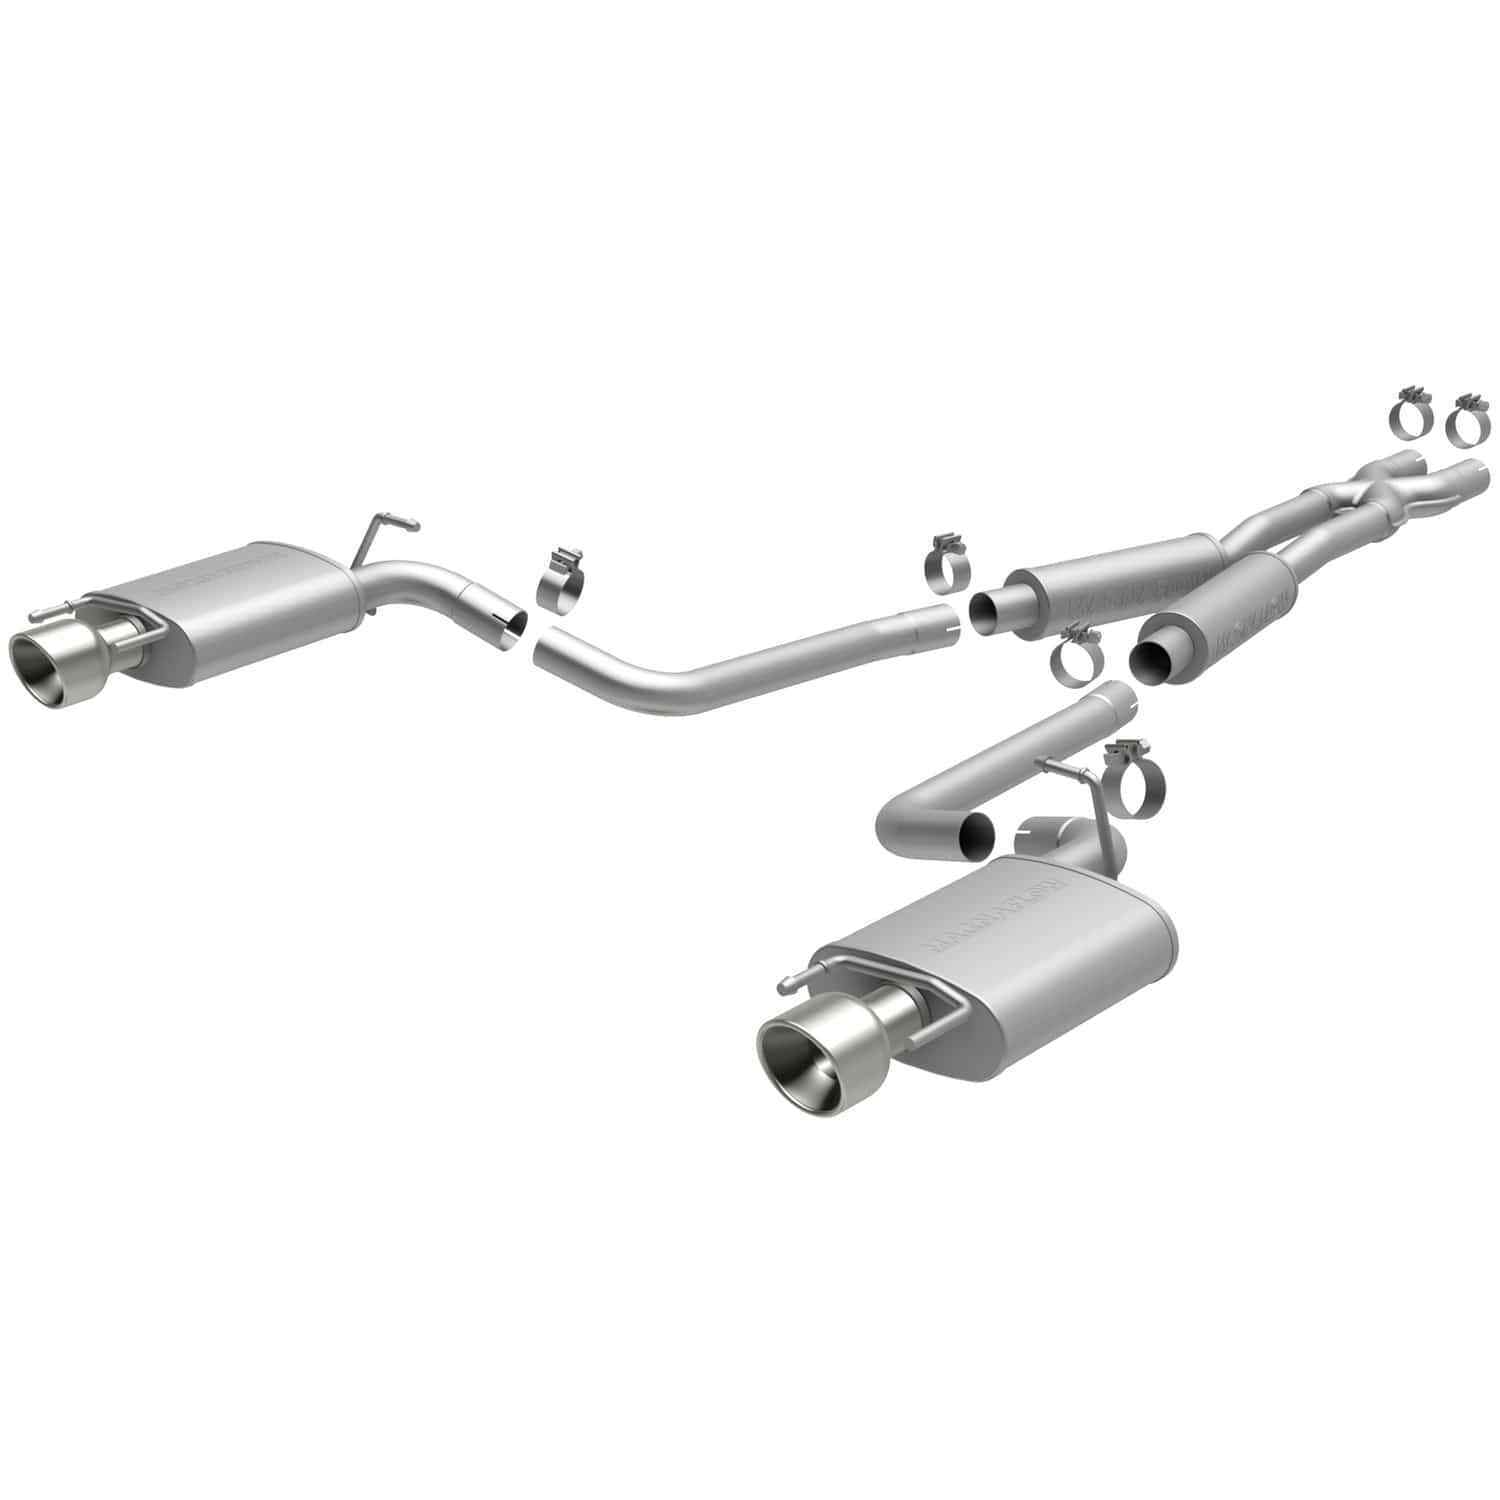 MagnaFlow 2010-2014 Cadillac CTS Cat-Back Performance Exhaust System